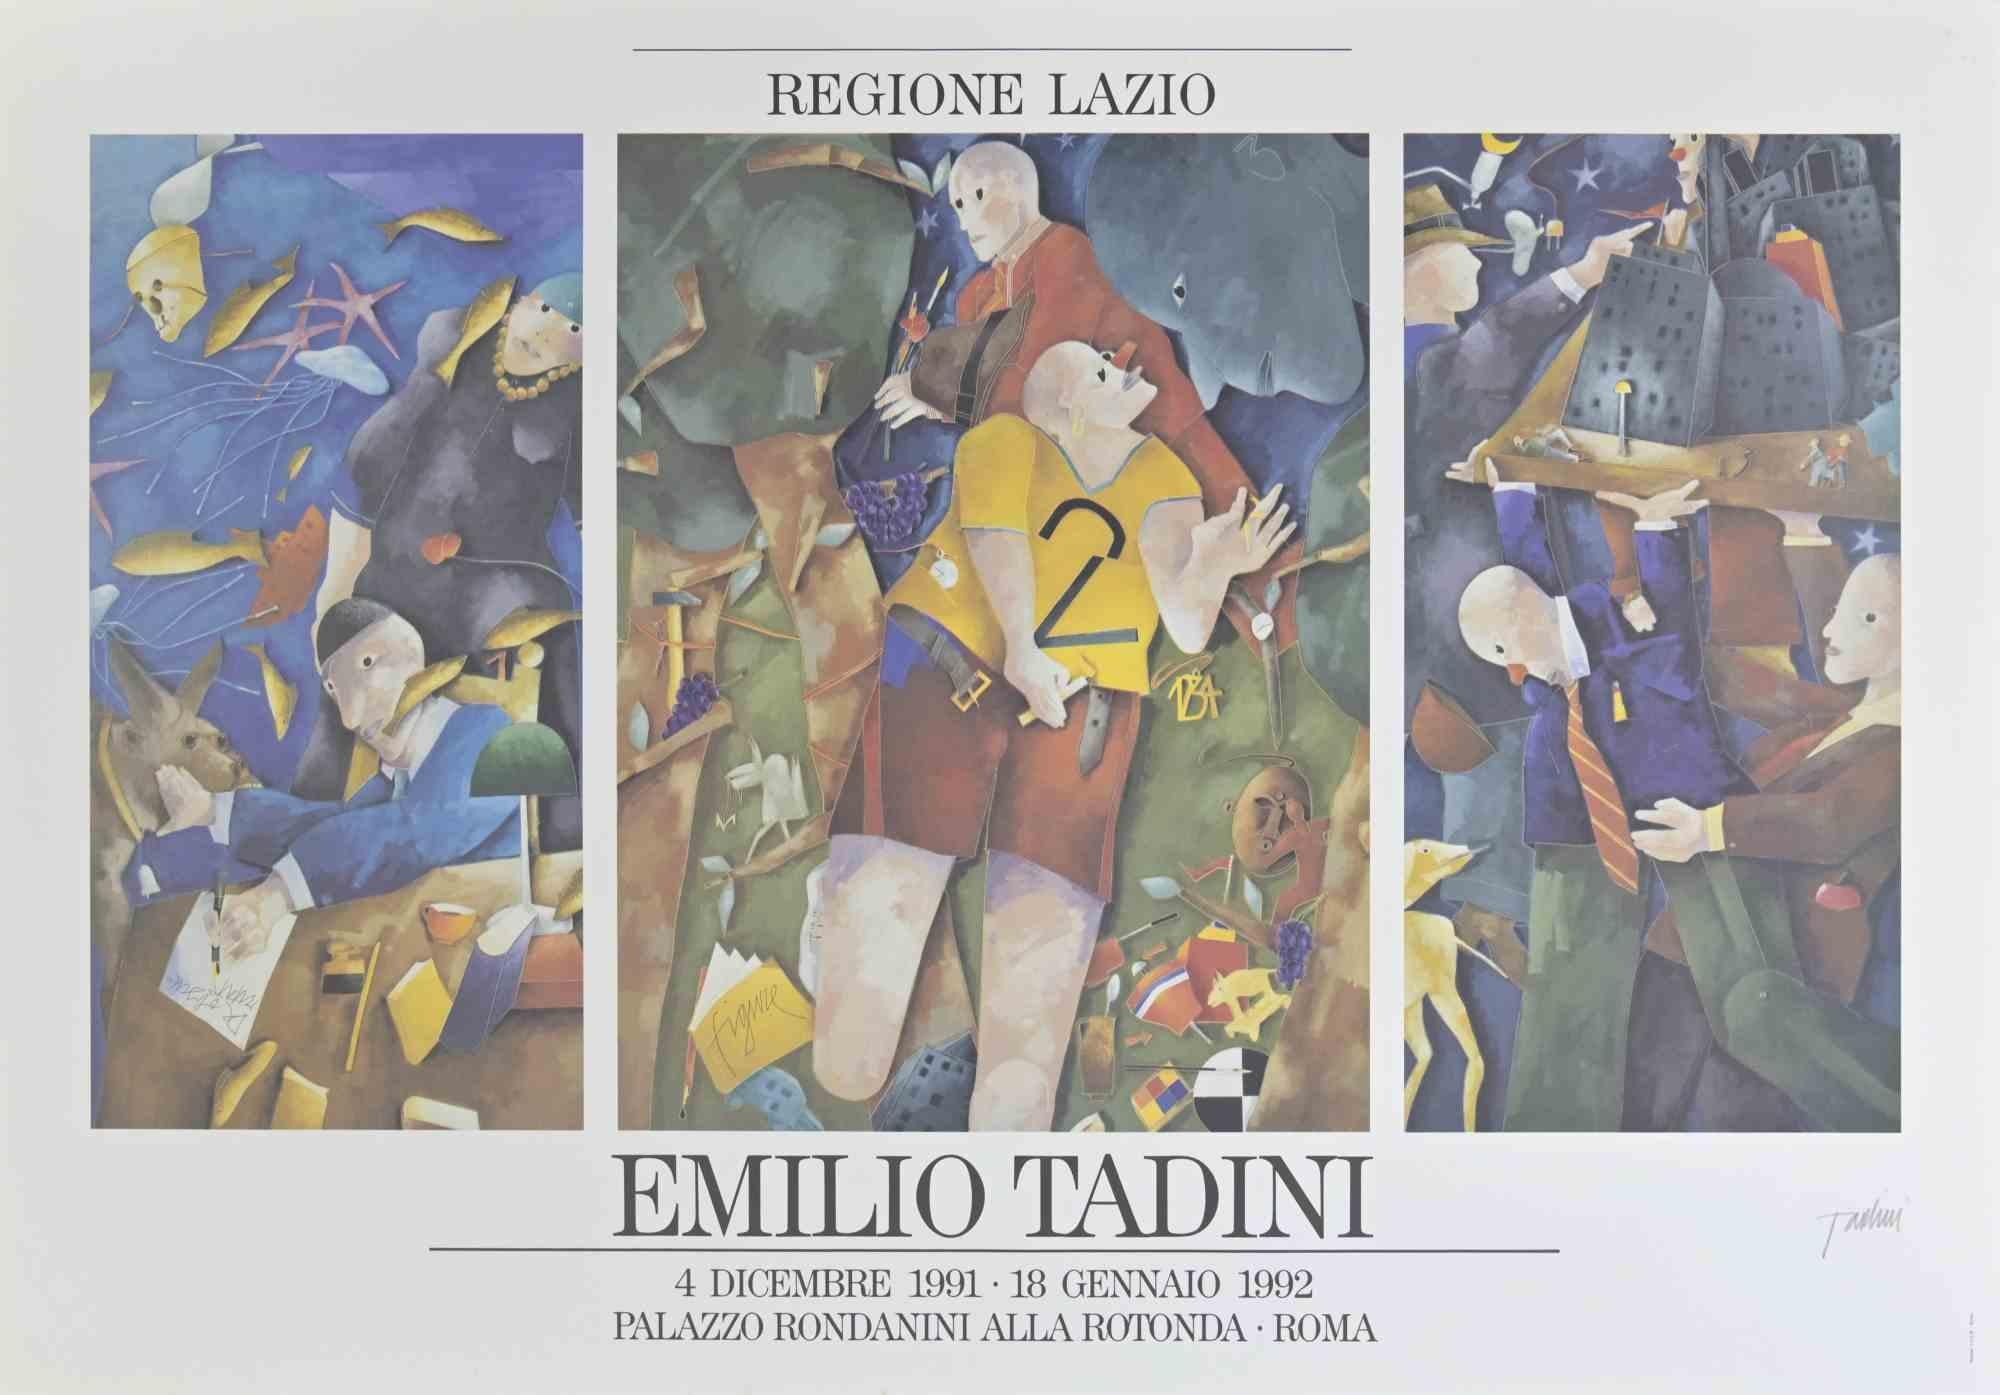 Emilio Tadini Poster Exhibition is an original offset poster realized in 1992.

The artwork was realized in occasion of the exhibition held in Rondanini Gallery, Rome in 1992. 

Hand-signed by the artist on the lower right margin